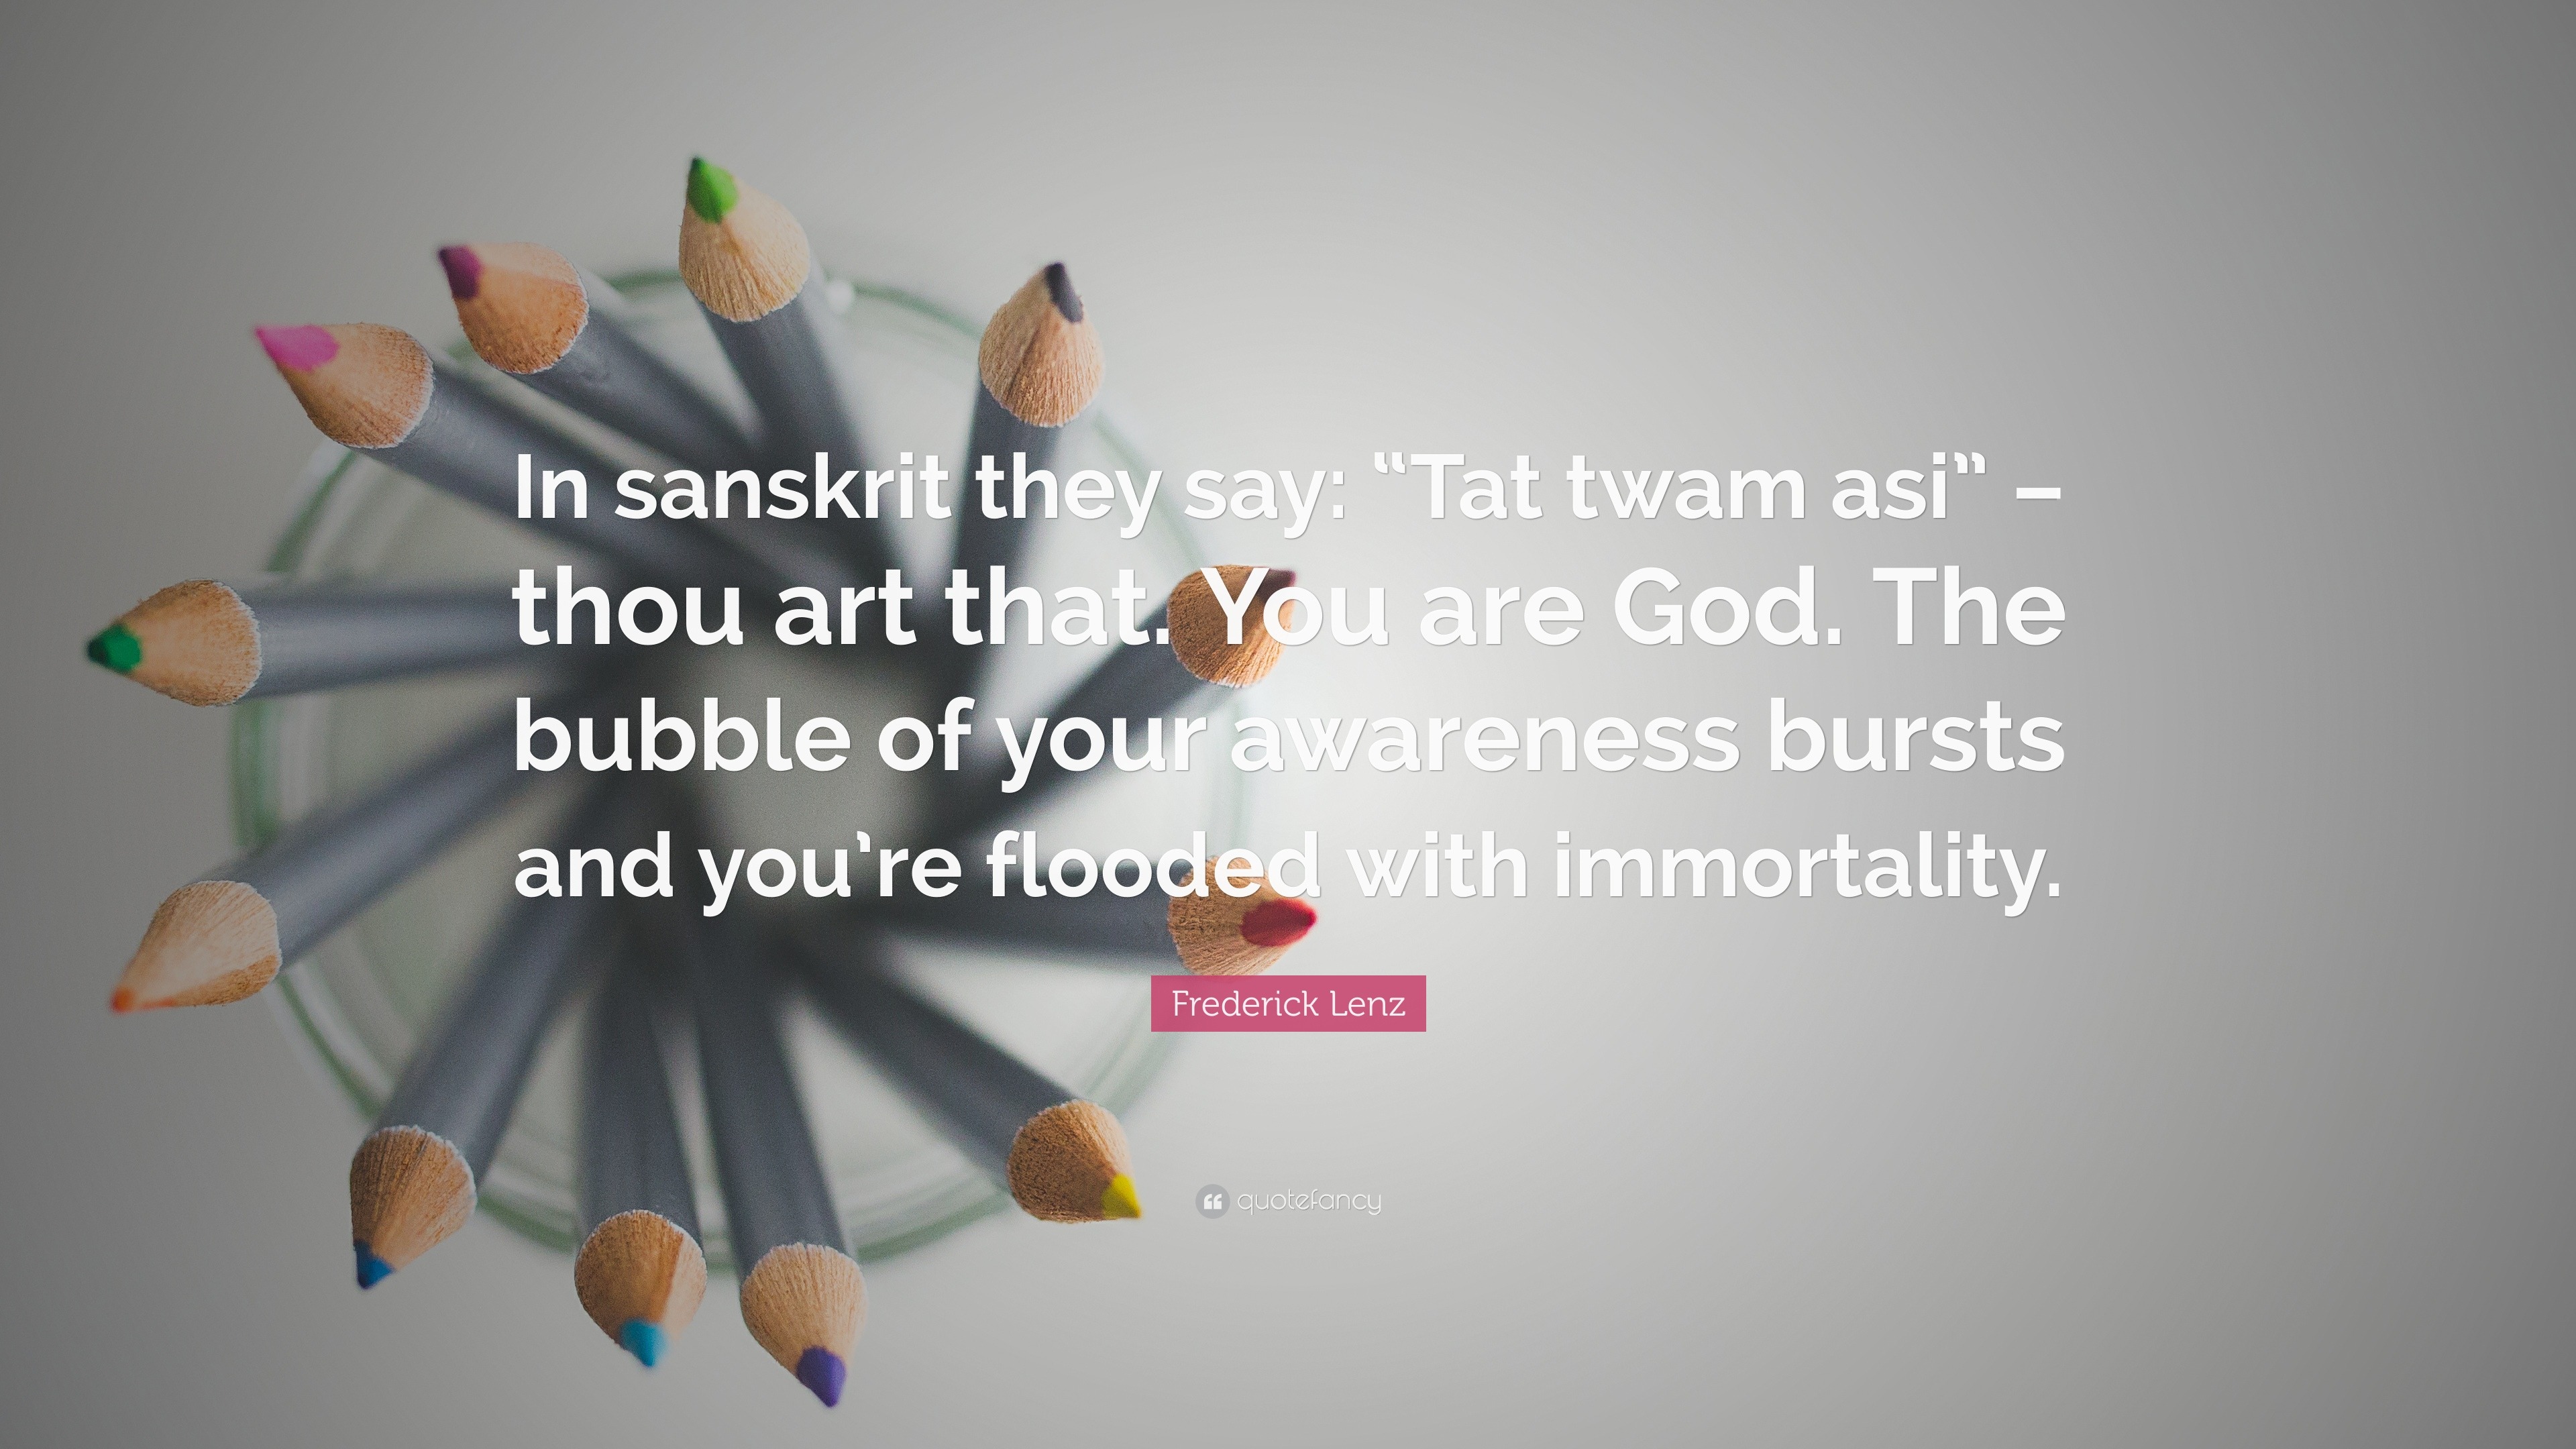 Frederick Lenz Quote: “In sanskrit they say: “Tat twam asi” – thou art  that. You are God. The bubble of your awareness bursts and you're floode...”